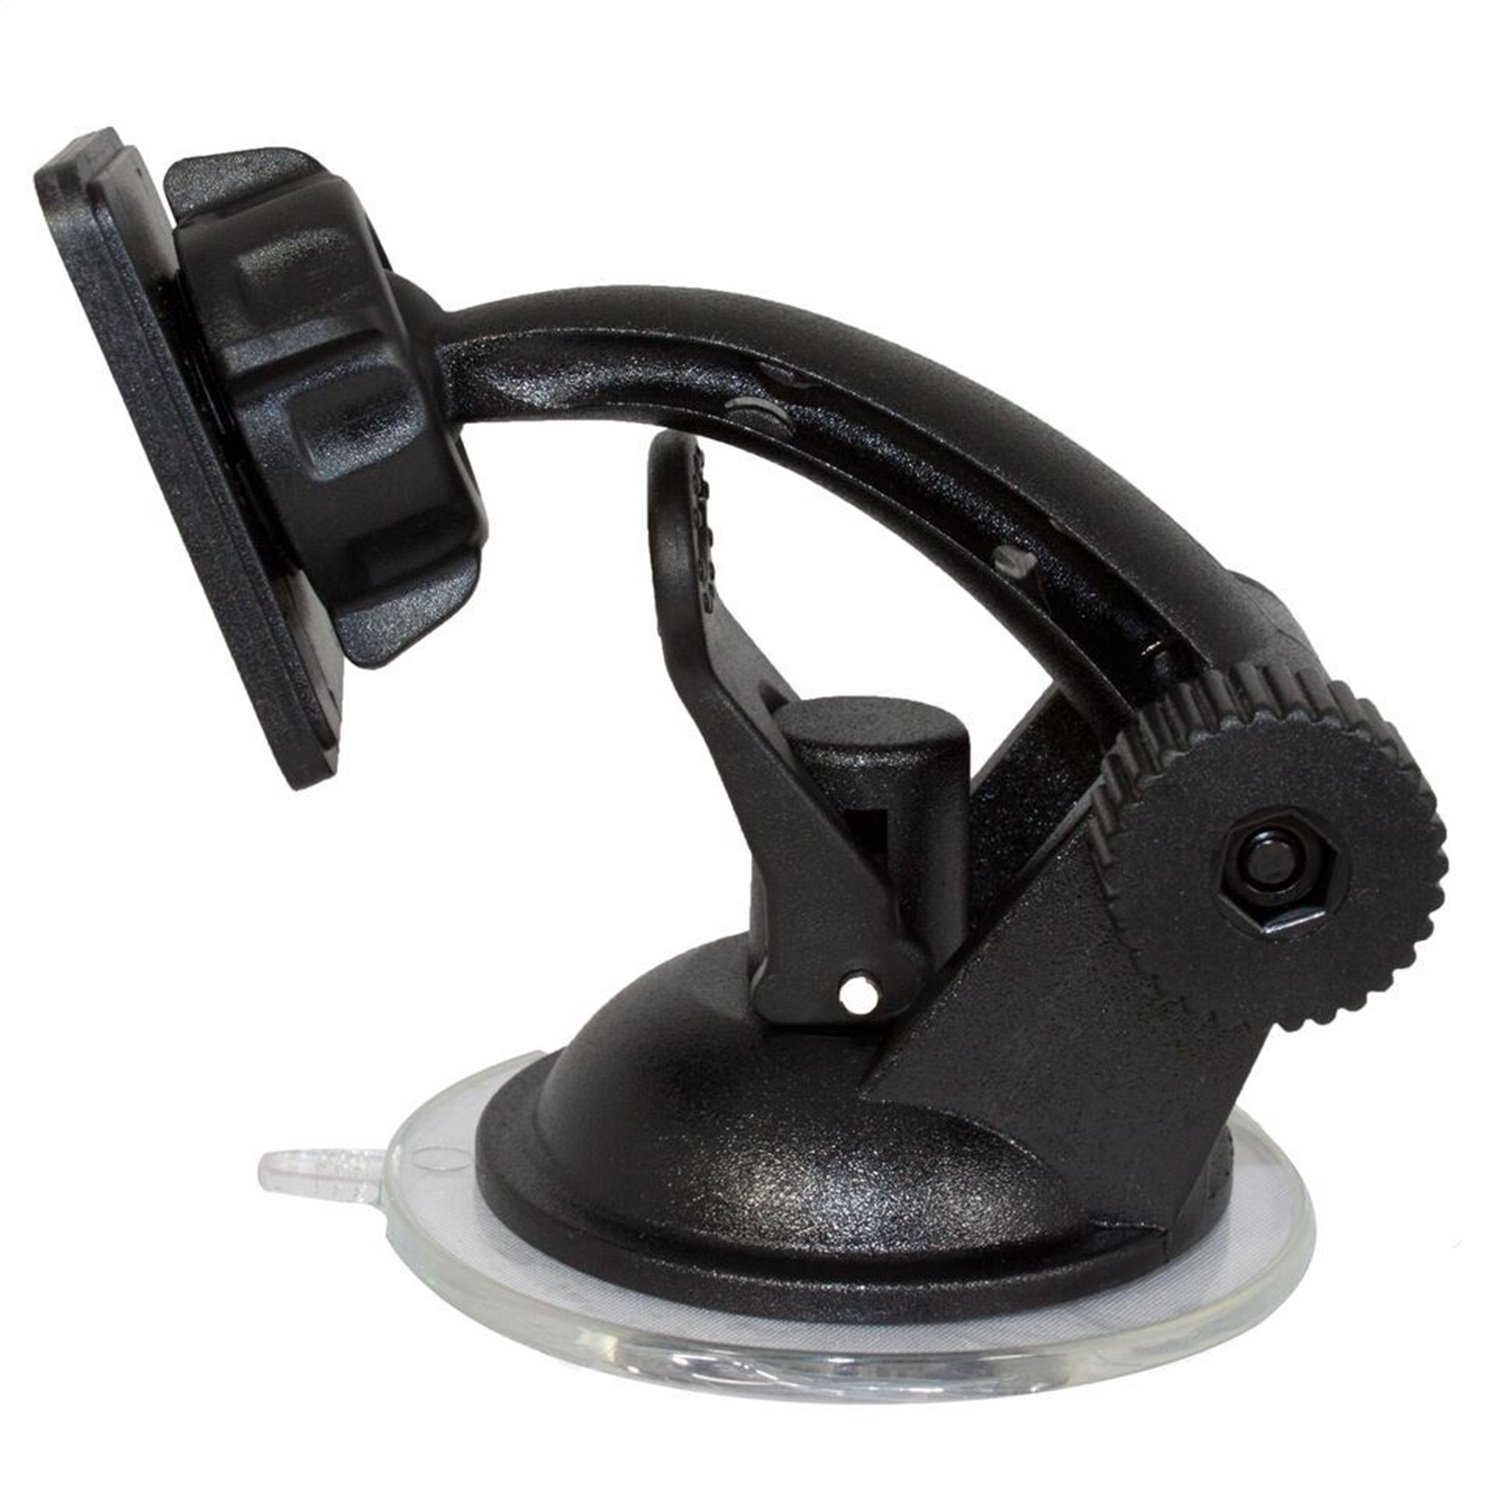 T1000 SUCTION CUP MOUNT